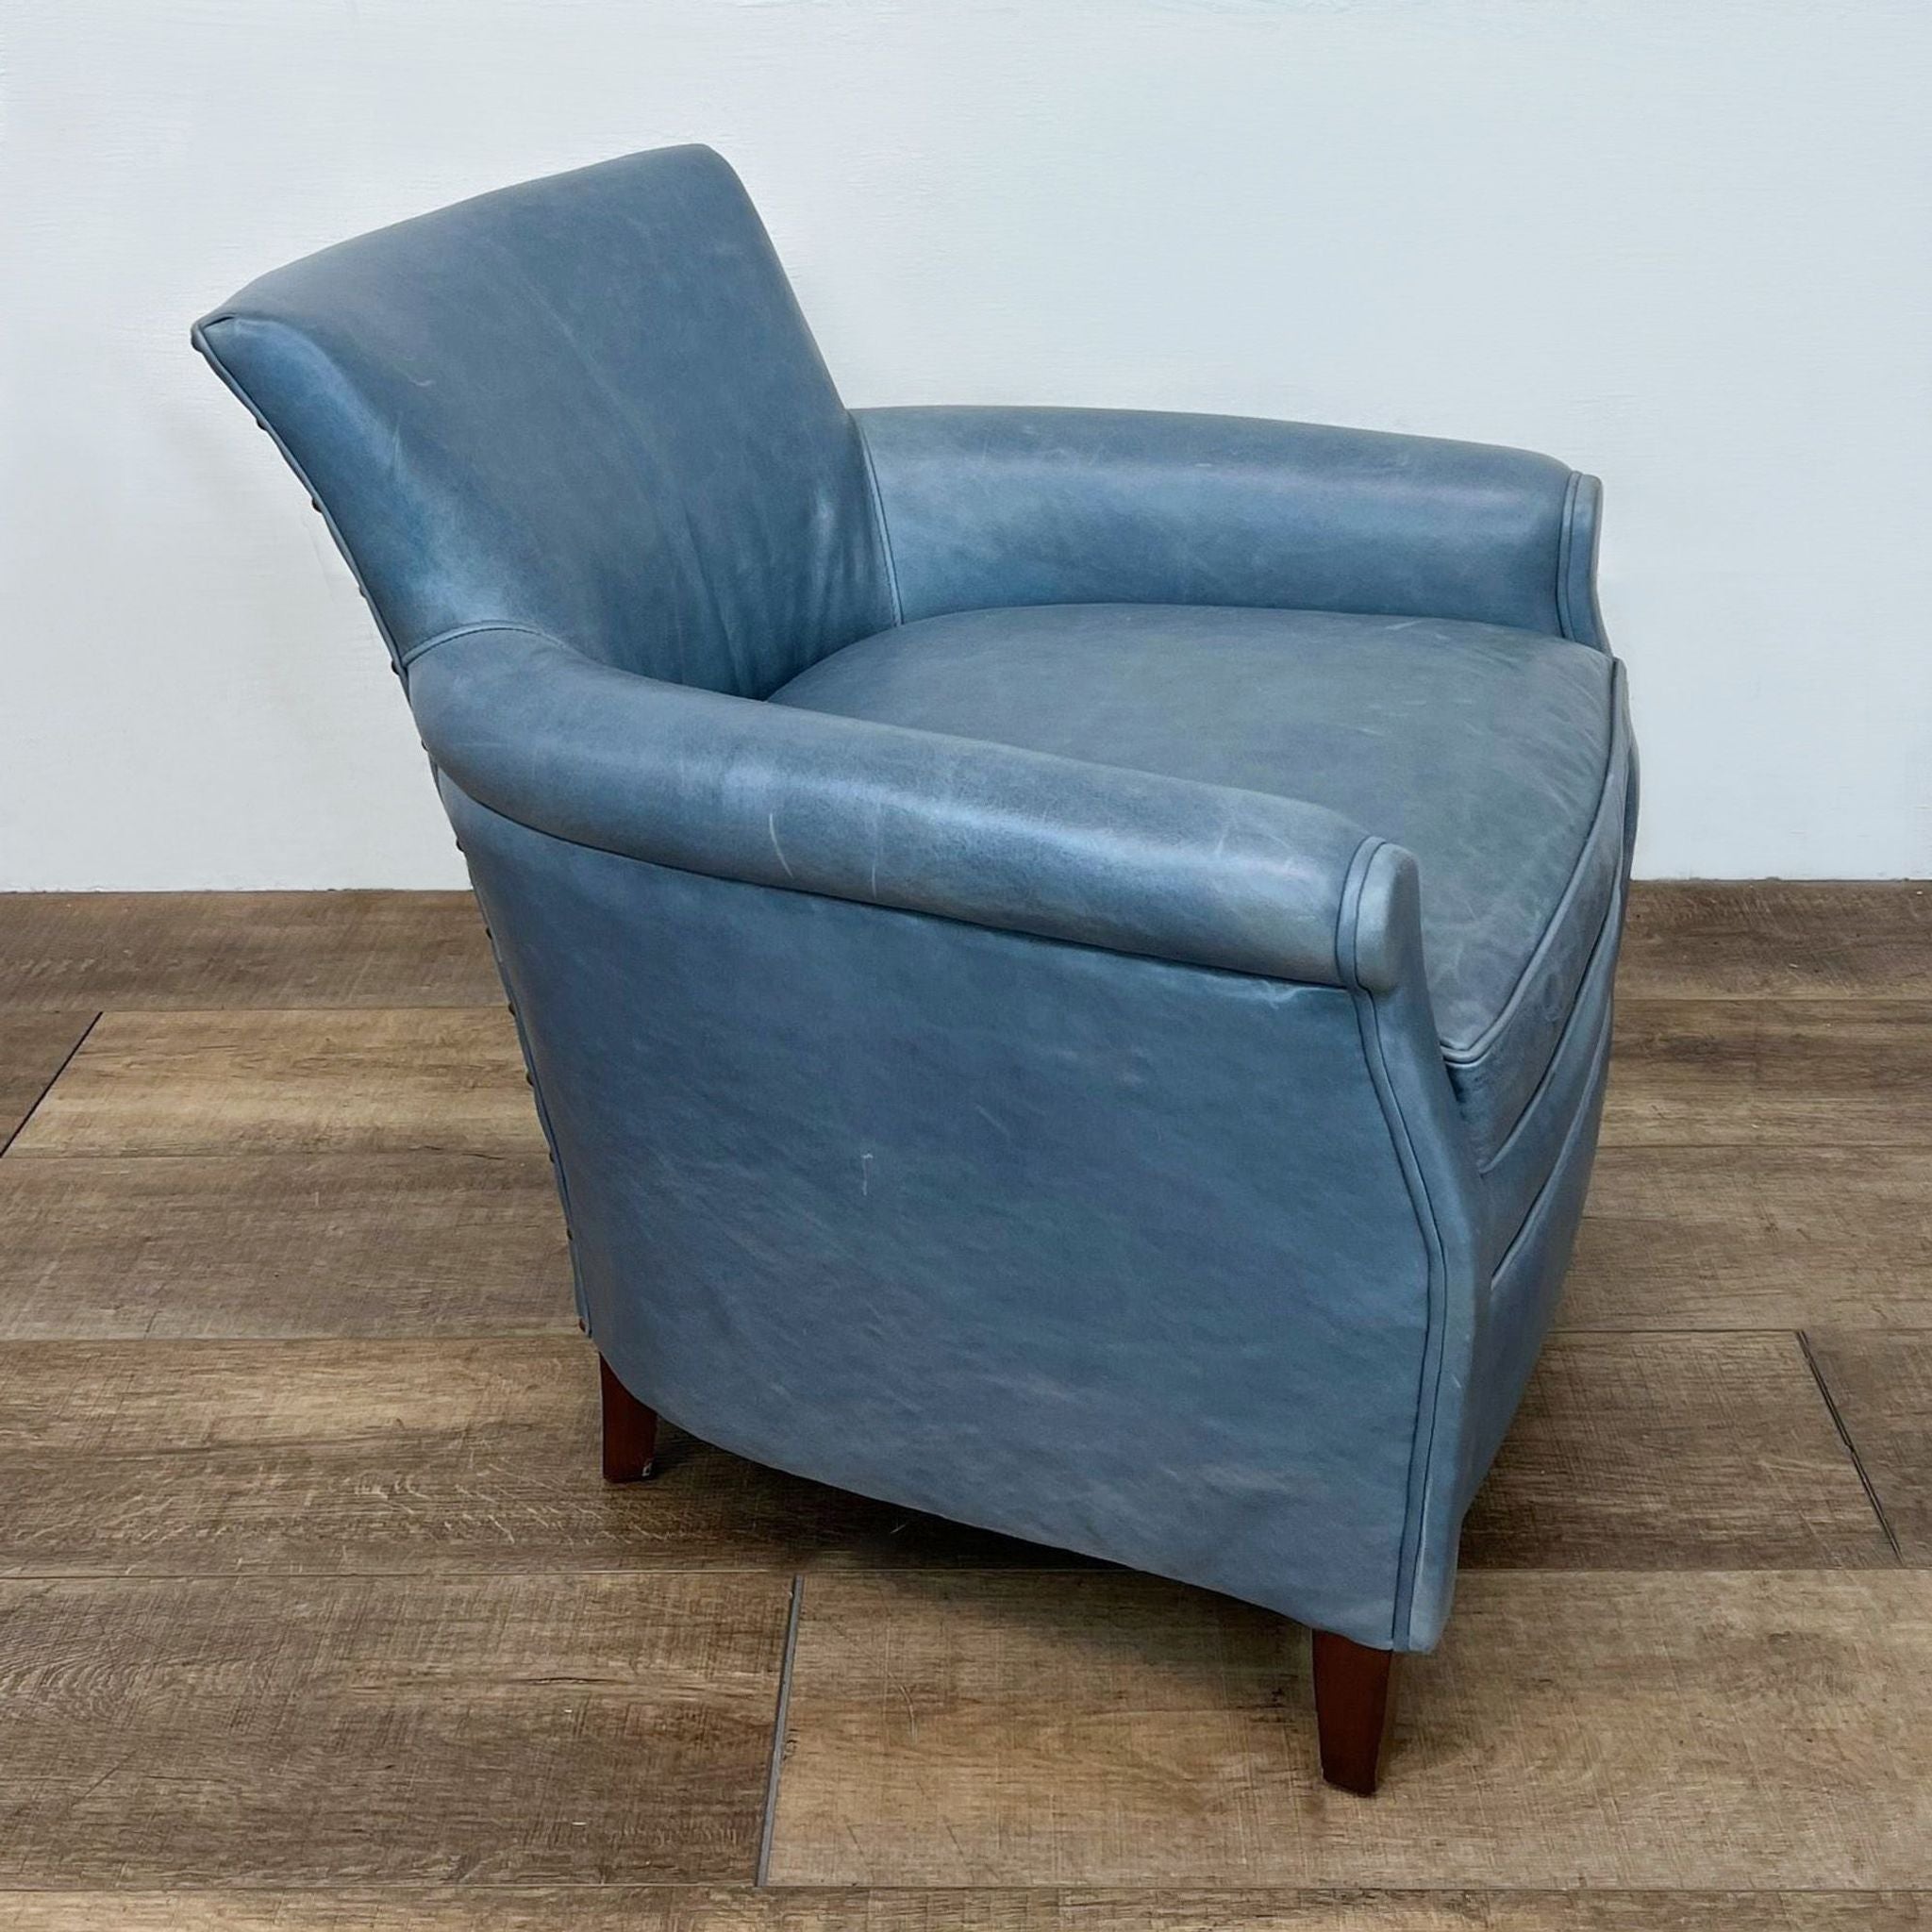 Moore and Giles 33 Original leather lounge chair in blue, showcasing the side profile and wooden legs on a hardwood floor.